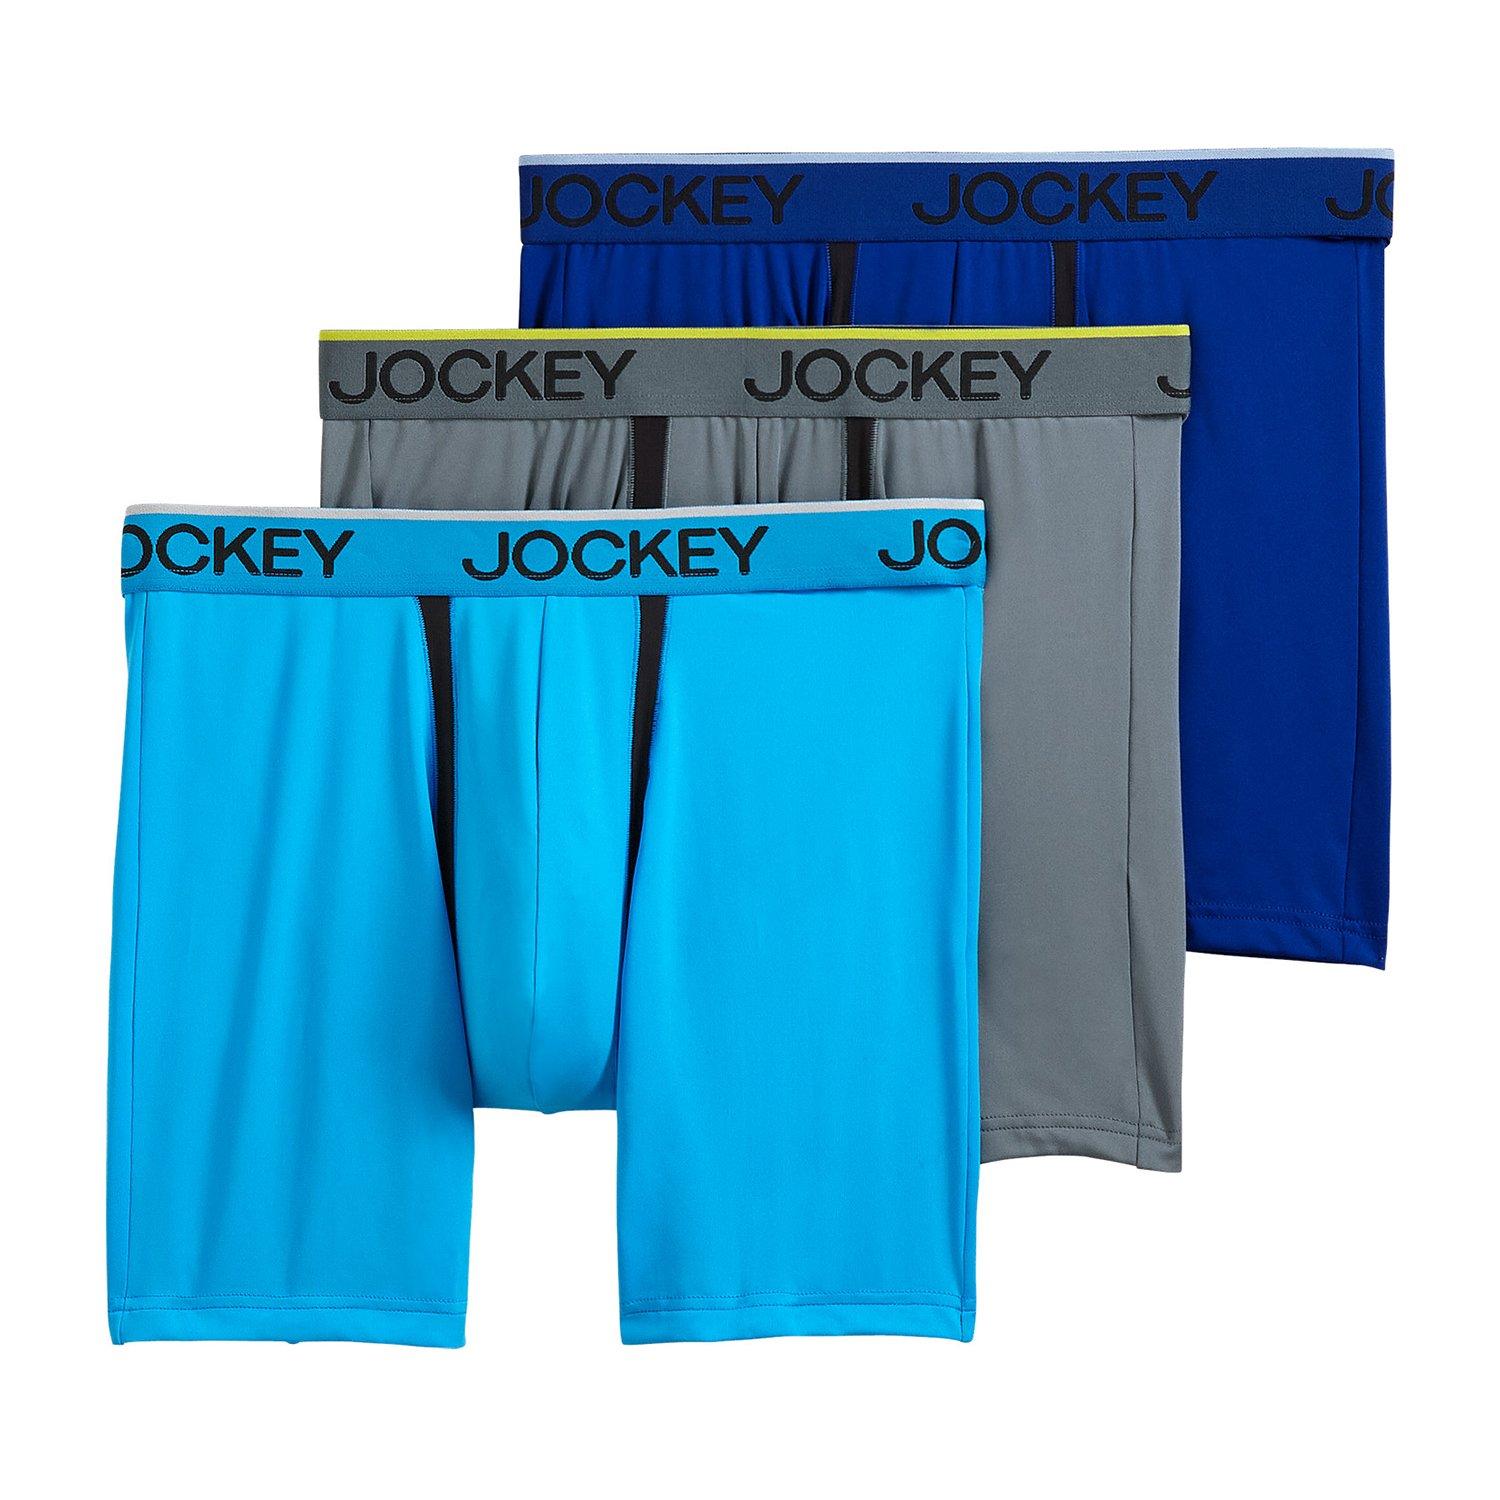 PAIR OF THIEVES Tap Water Park Mens Boxer Briefs